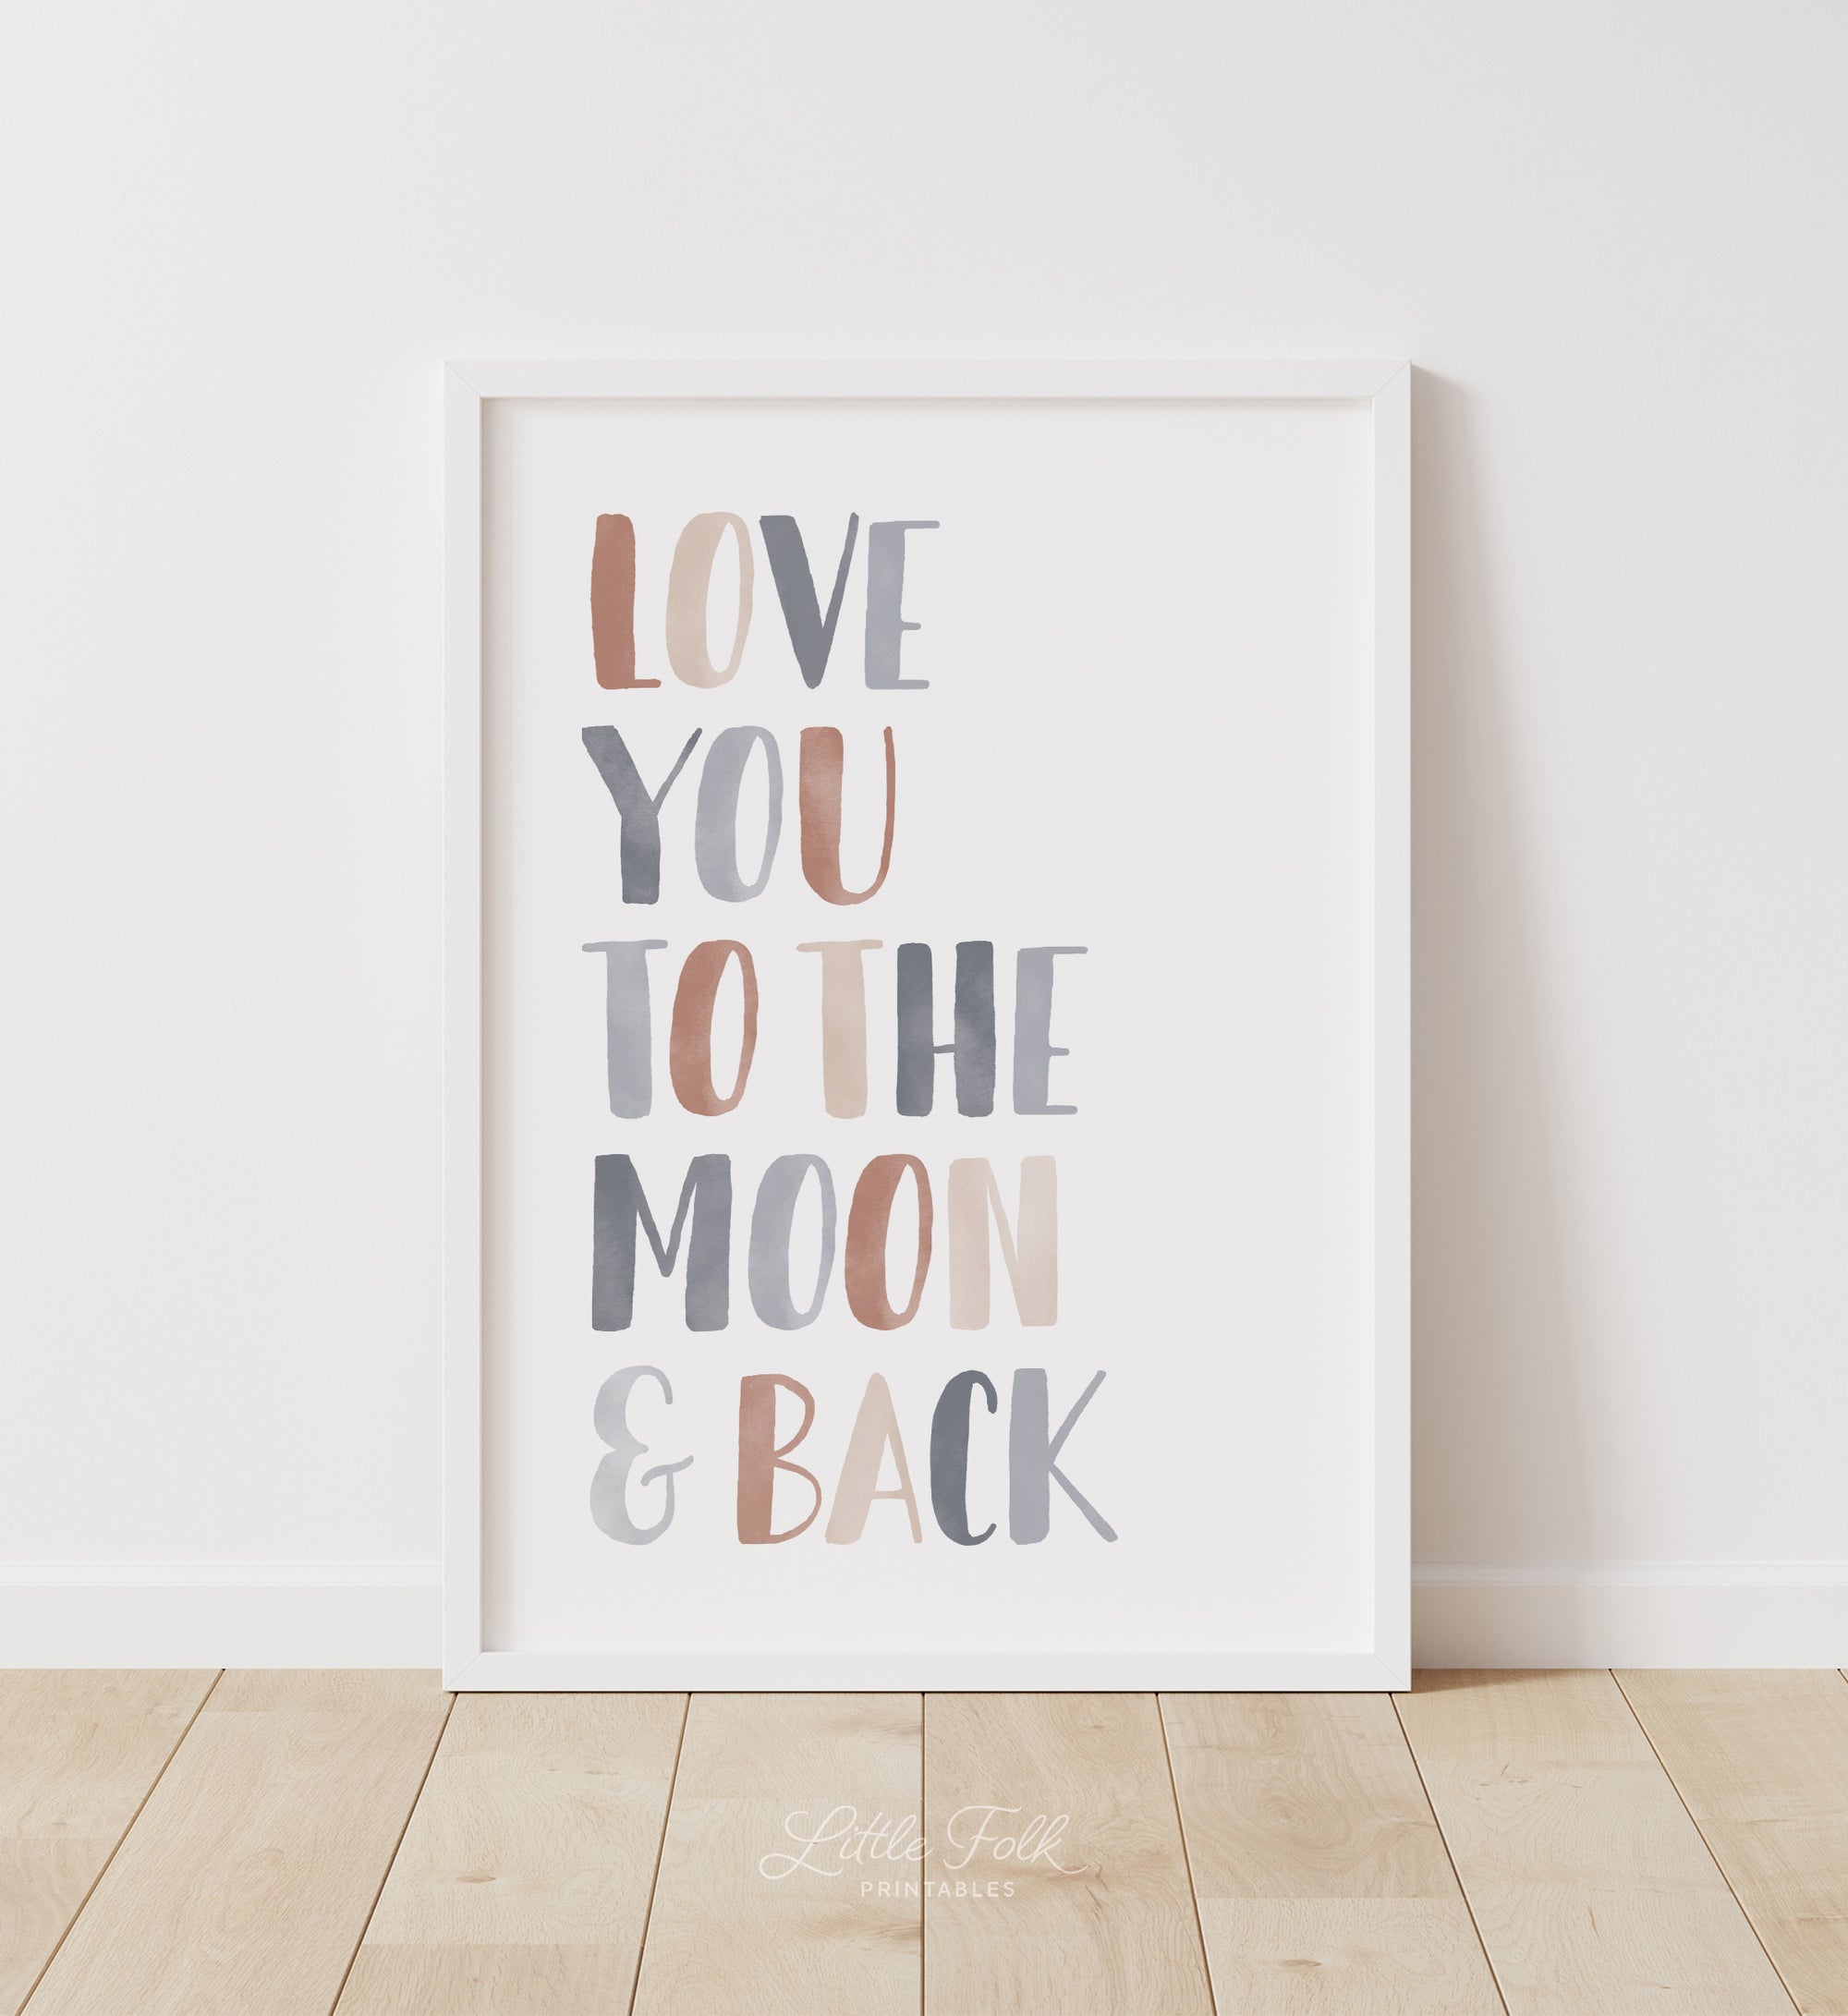 Love You to the Moon and Back Print - EBCP